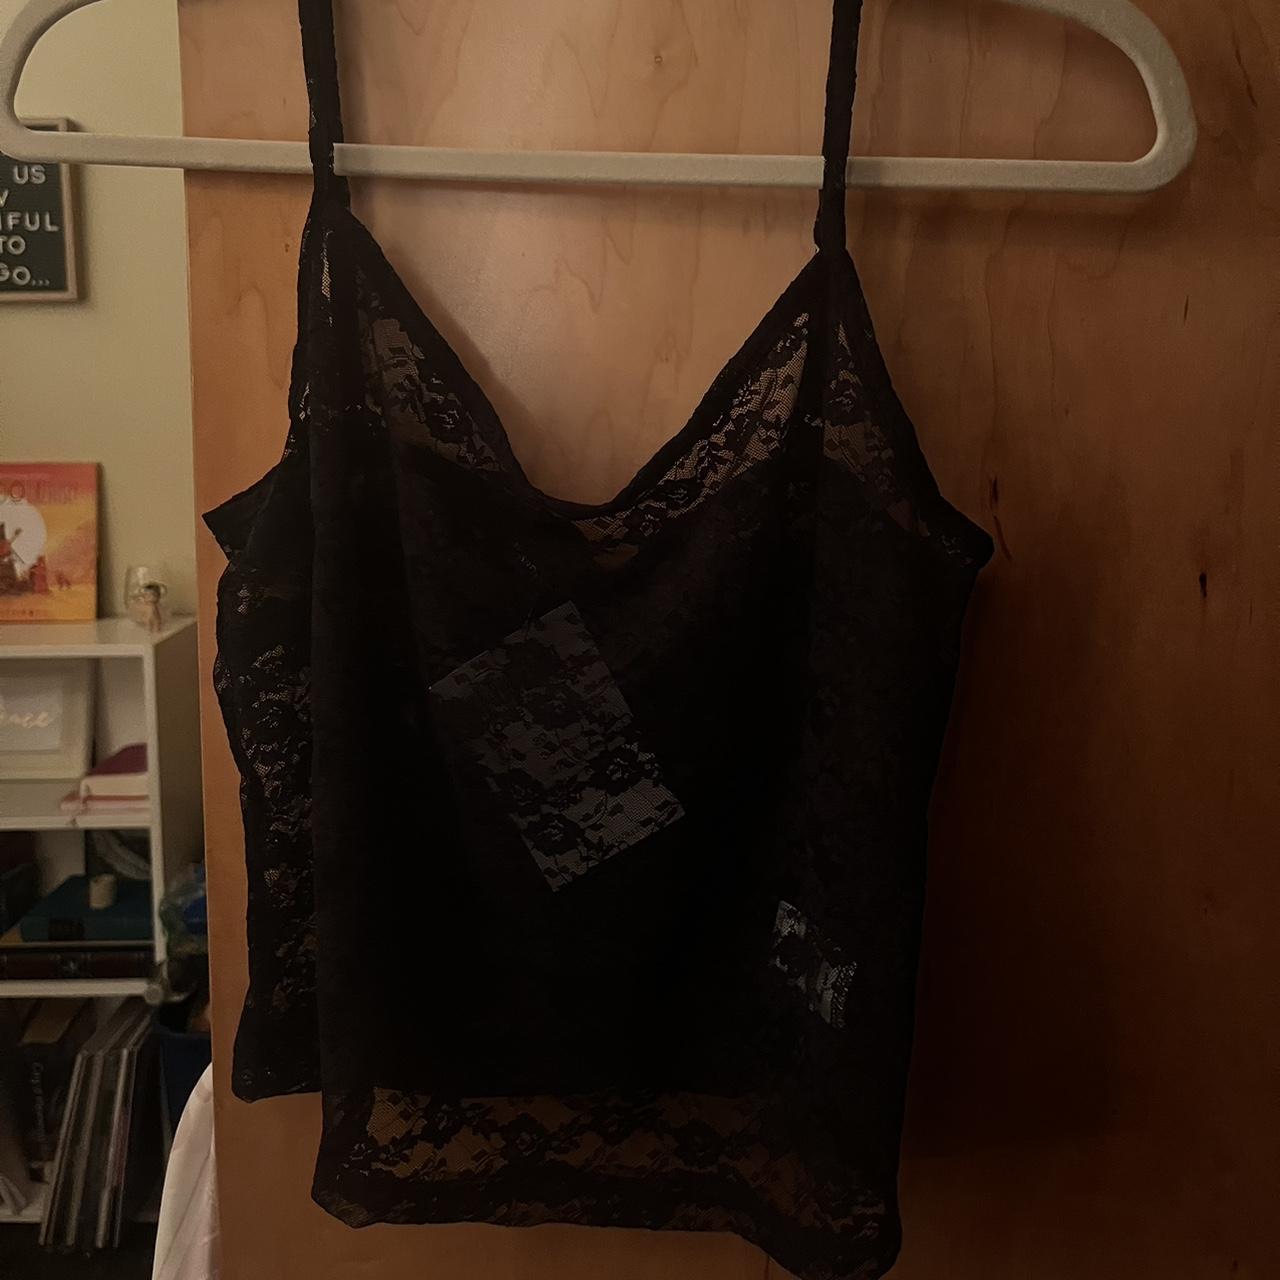 Brandy Melville tank top cami w/ embroidered - Depop